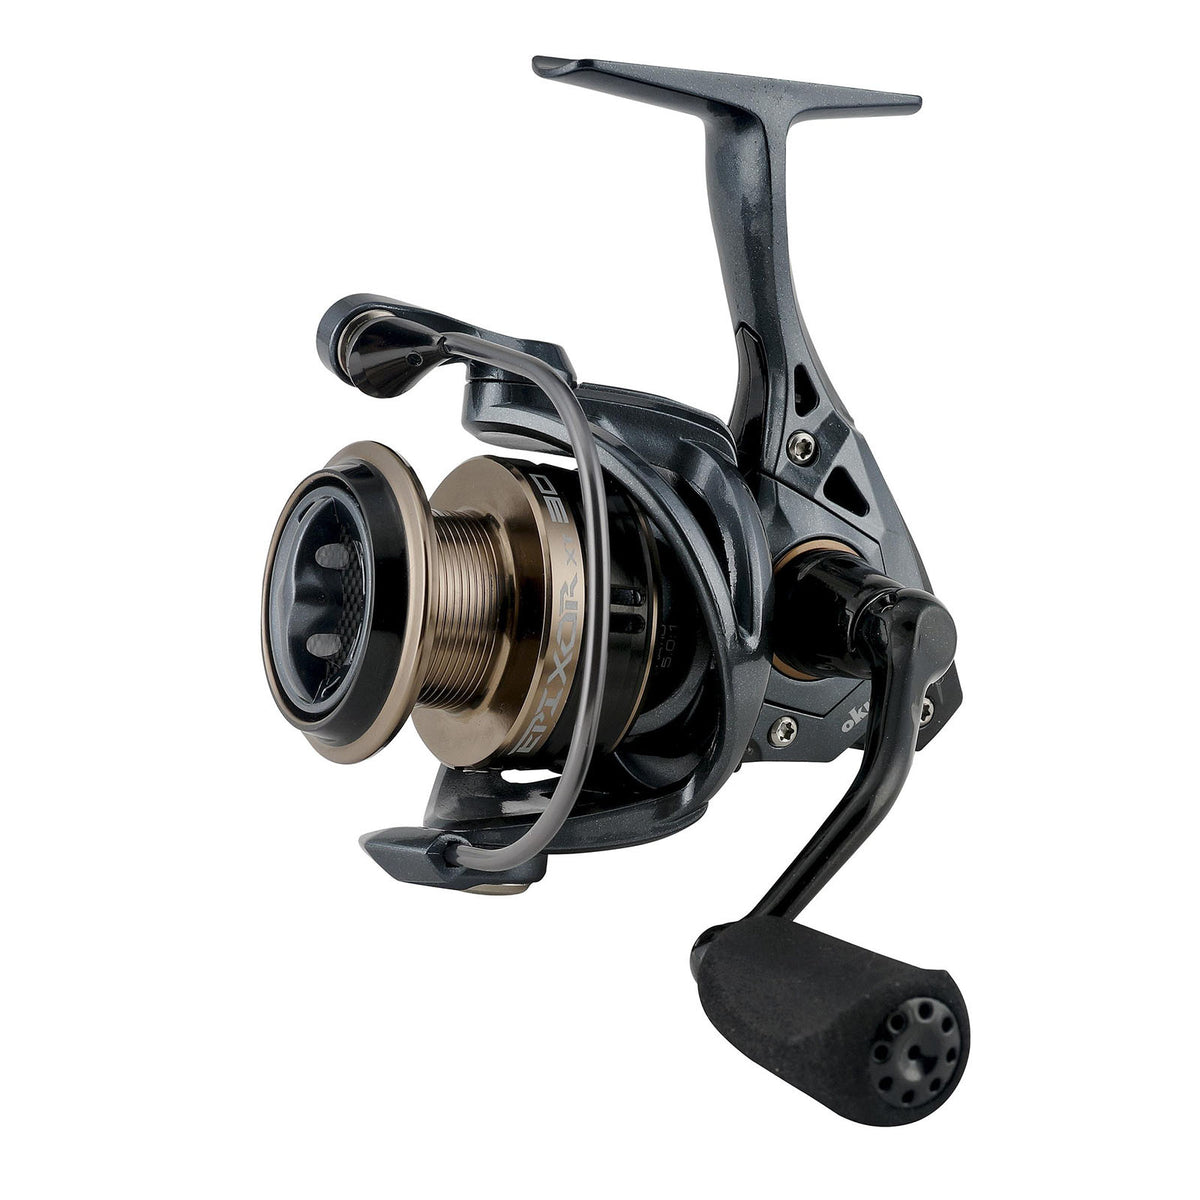 Mini Spinning Reel, 4.3:1 Gear Metal Fishing Reel, Ultra Smooth Powerful Spinning Fishing Reels with Reversible Handle, Compact Reel for Carp Bass